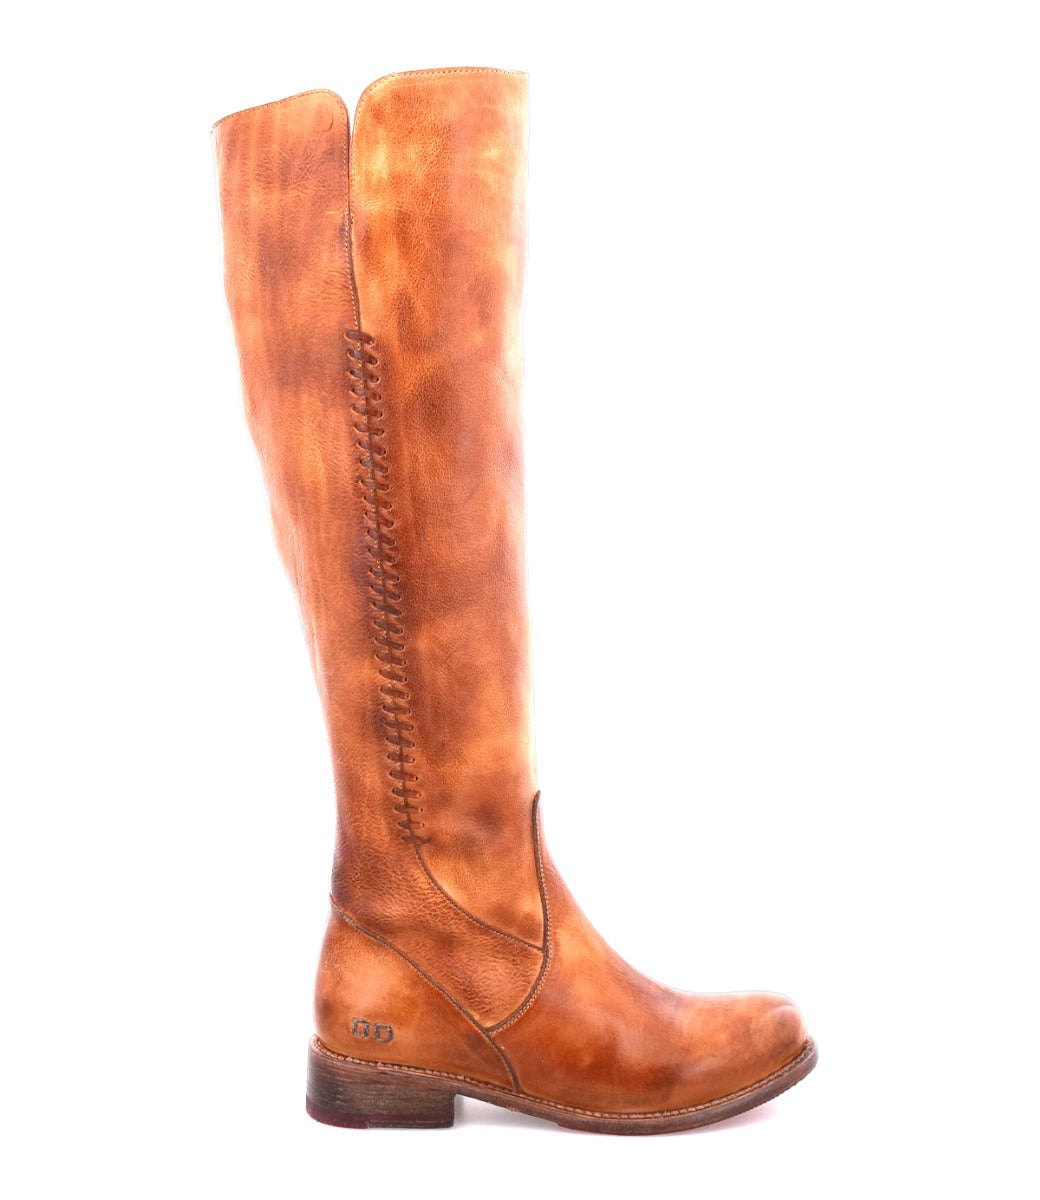 A Letizia by Bed Stu women's tan leather tall boot.